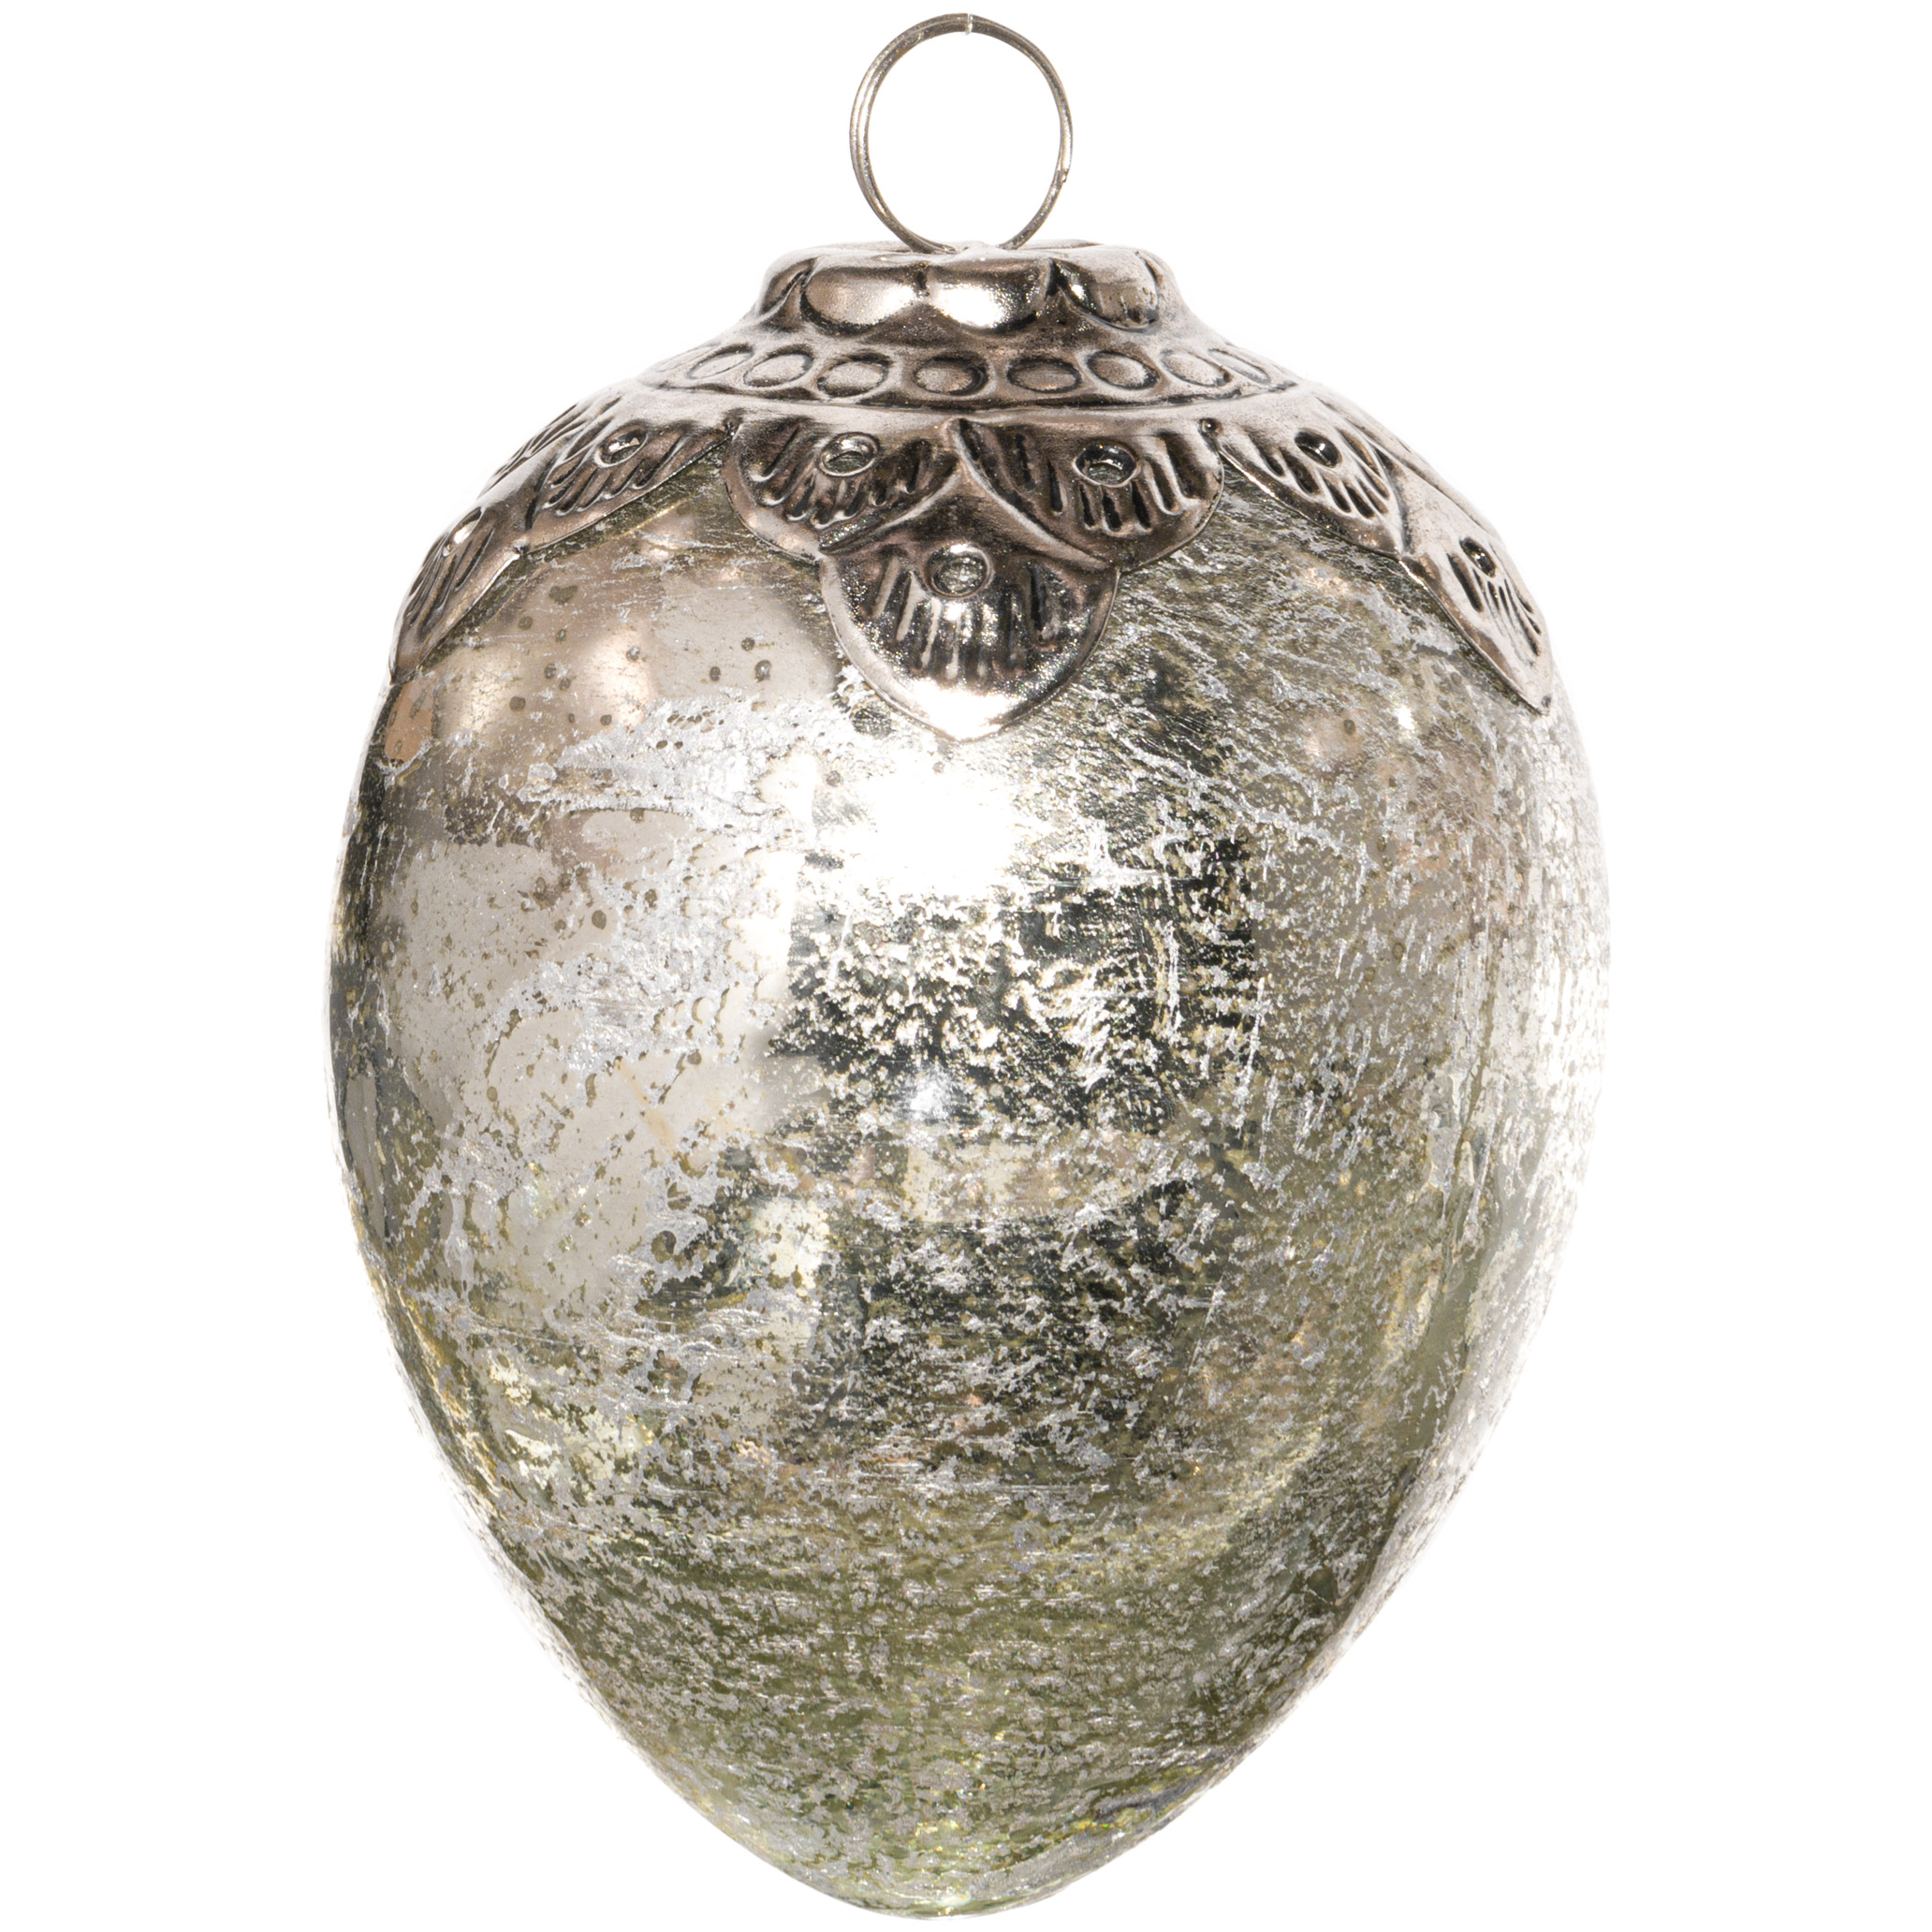 The Noel Collection Mercury Medium Oval Crested Bauble - Image 1